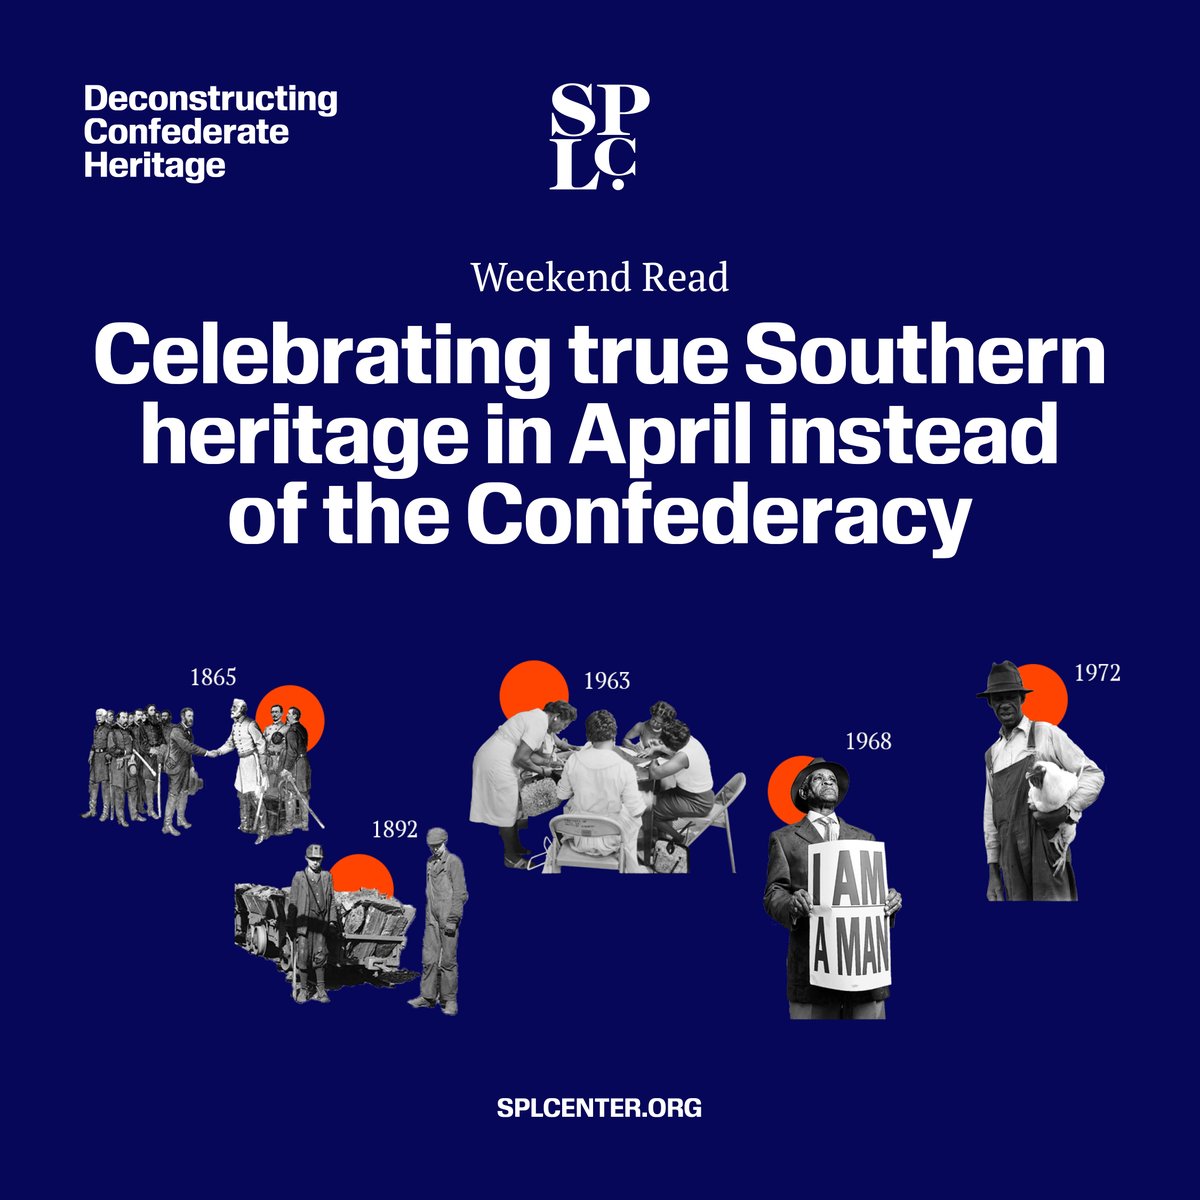 Make no mistake – the Confederacy and individuals who fought for slavery and white supremacy represent hate, not heritage.

This April, join the SPLC in celebrating true Southern heritage using this list of key anniversaries✨:bit.ly/49sKO5f

#WhoseHeritage #RefuseHate